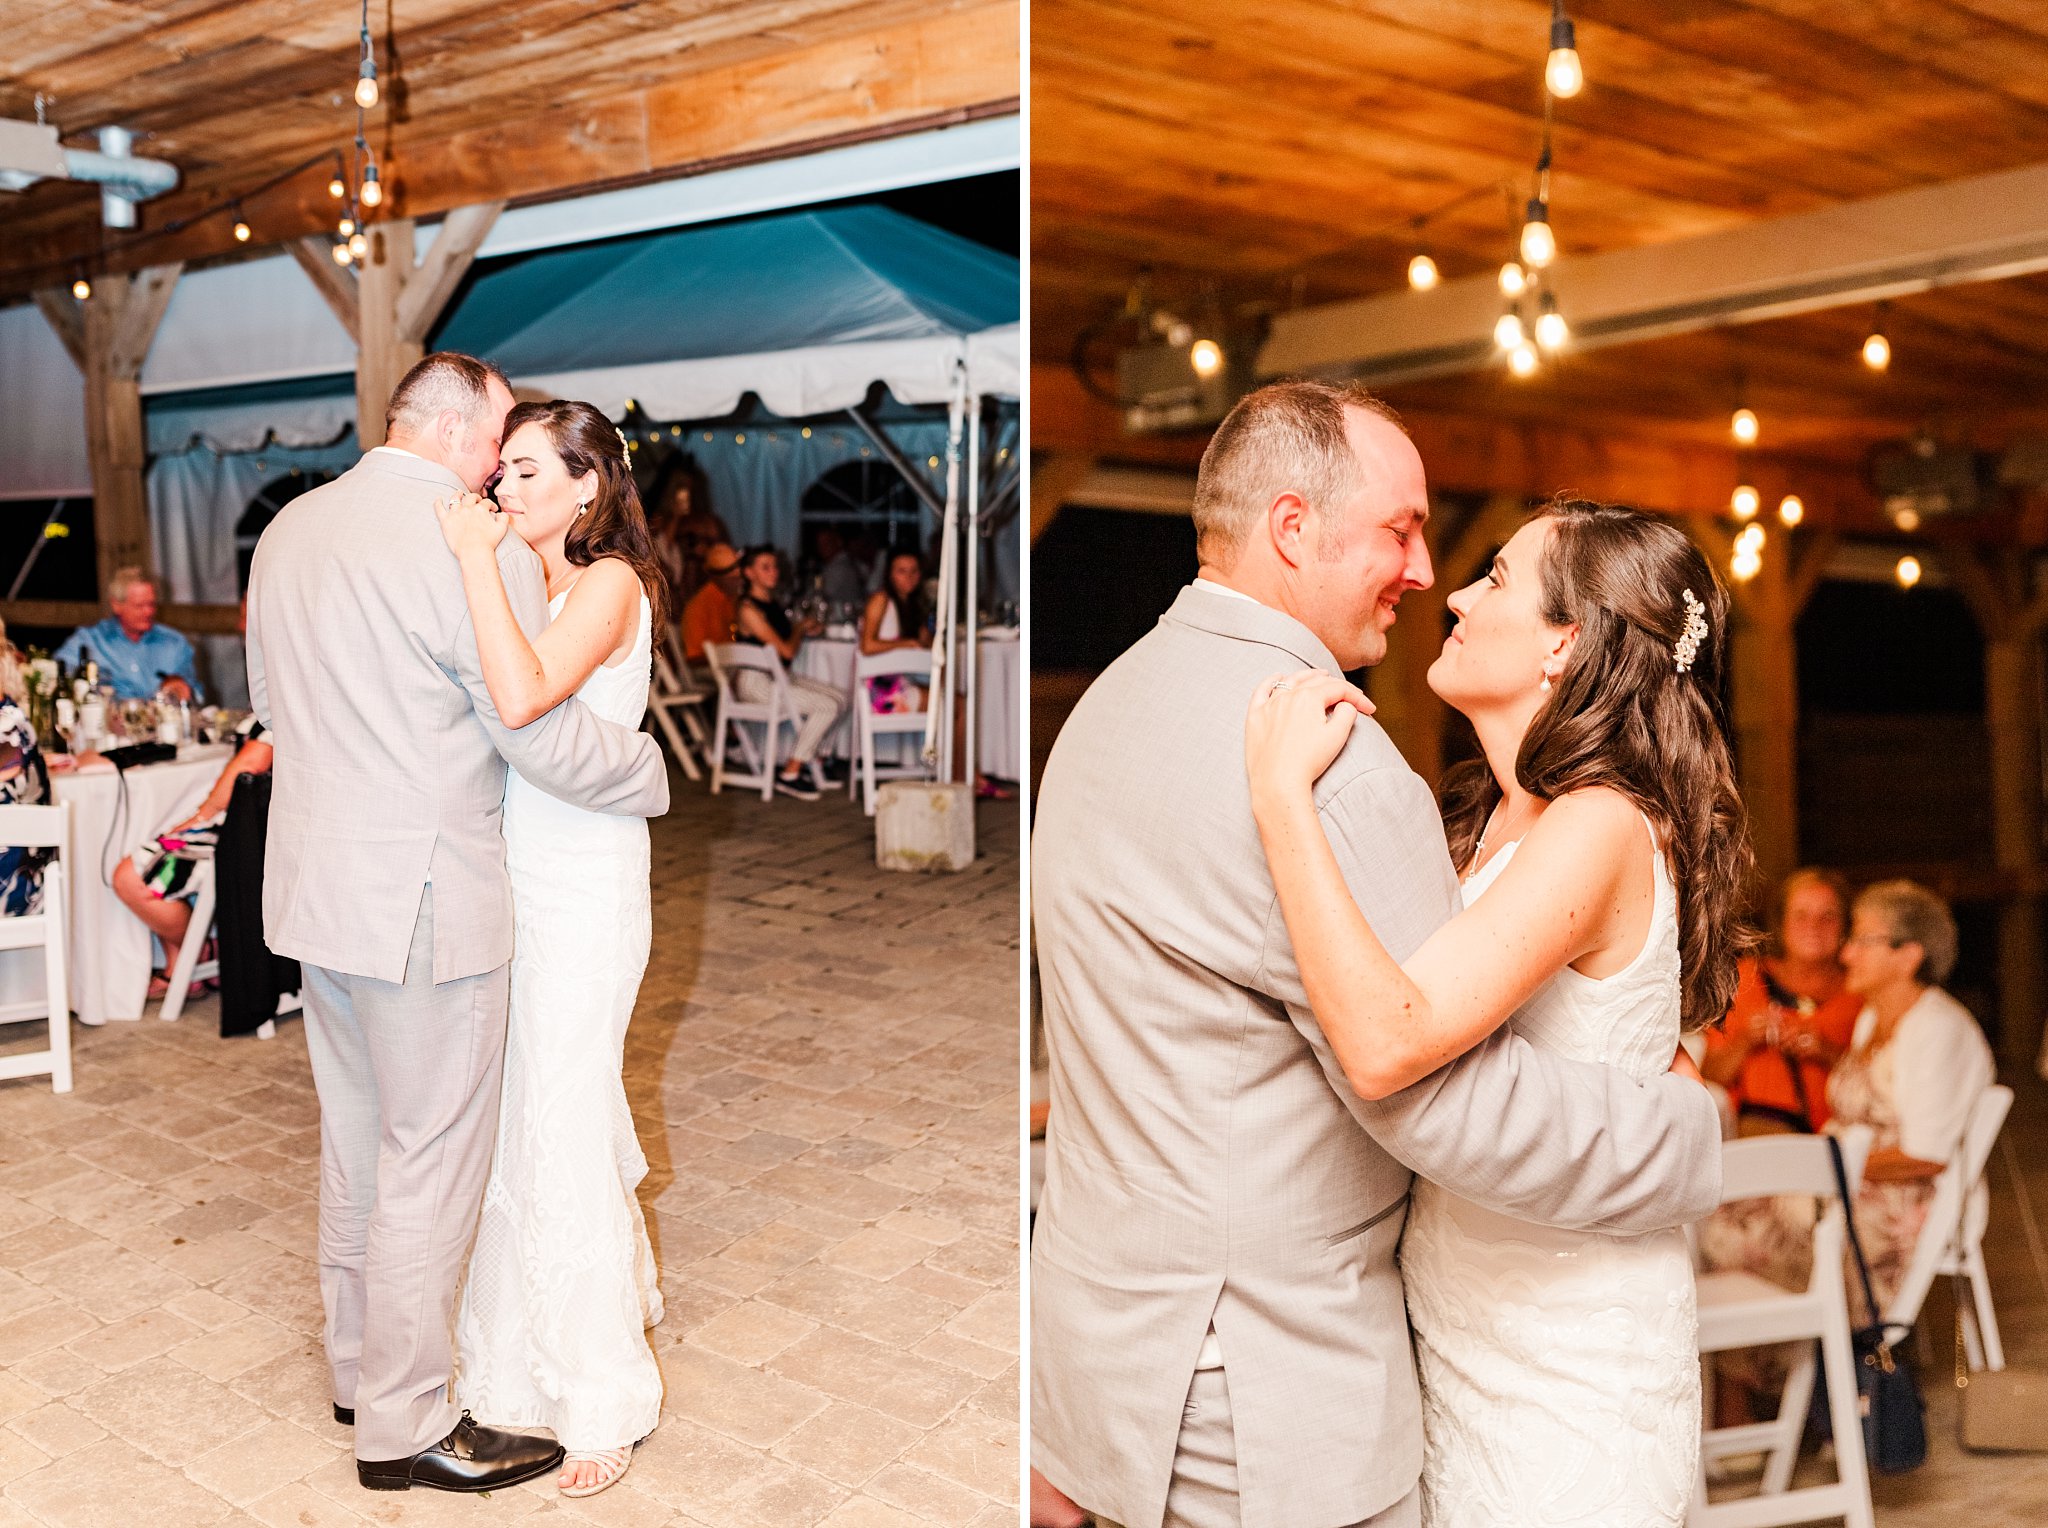 a bride and groom dance together for the first time as newlyweds at their caradoc sands wedding